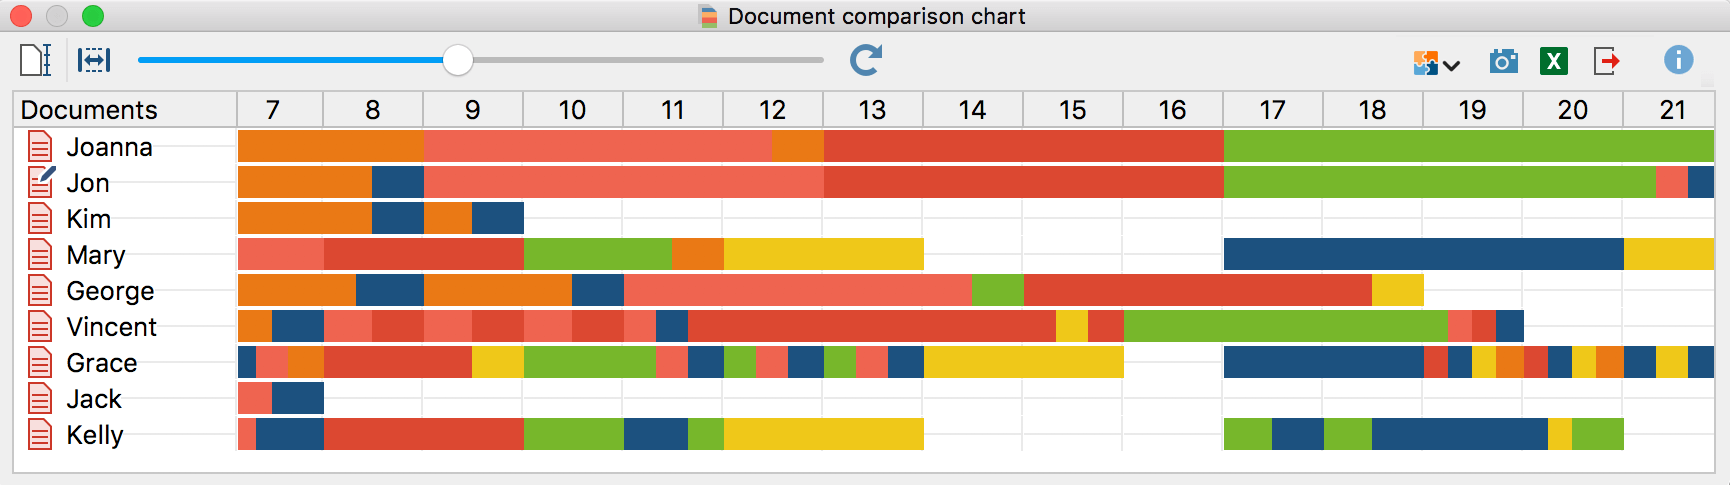 Example of a Document Comparison Chart